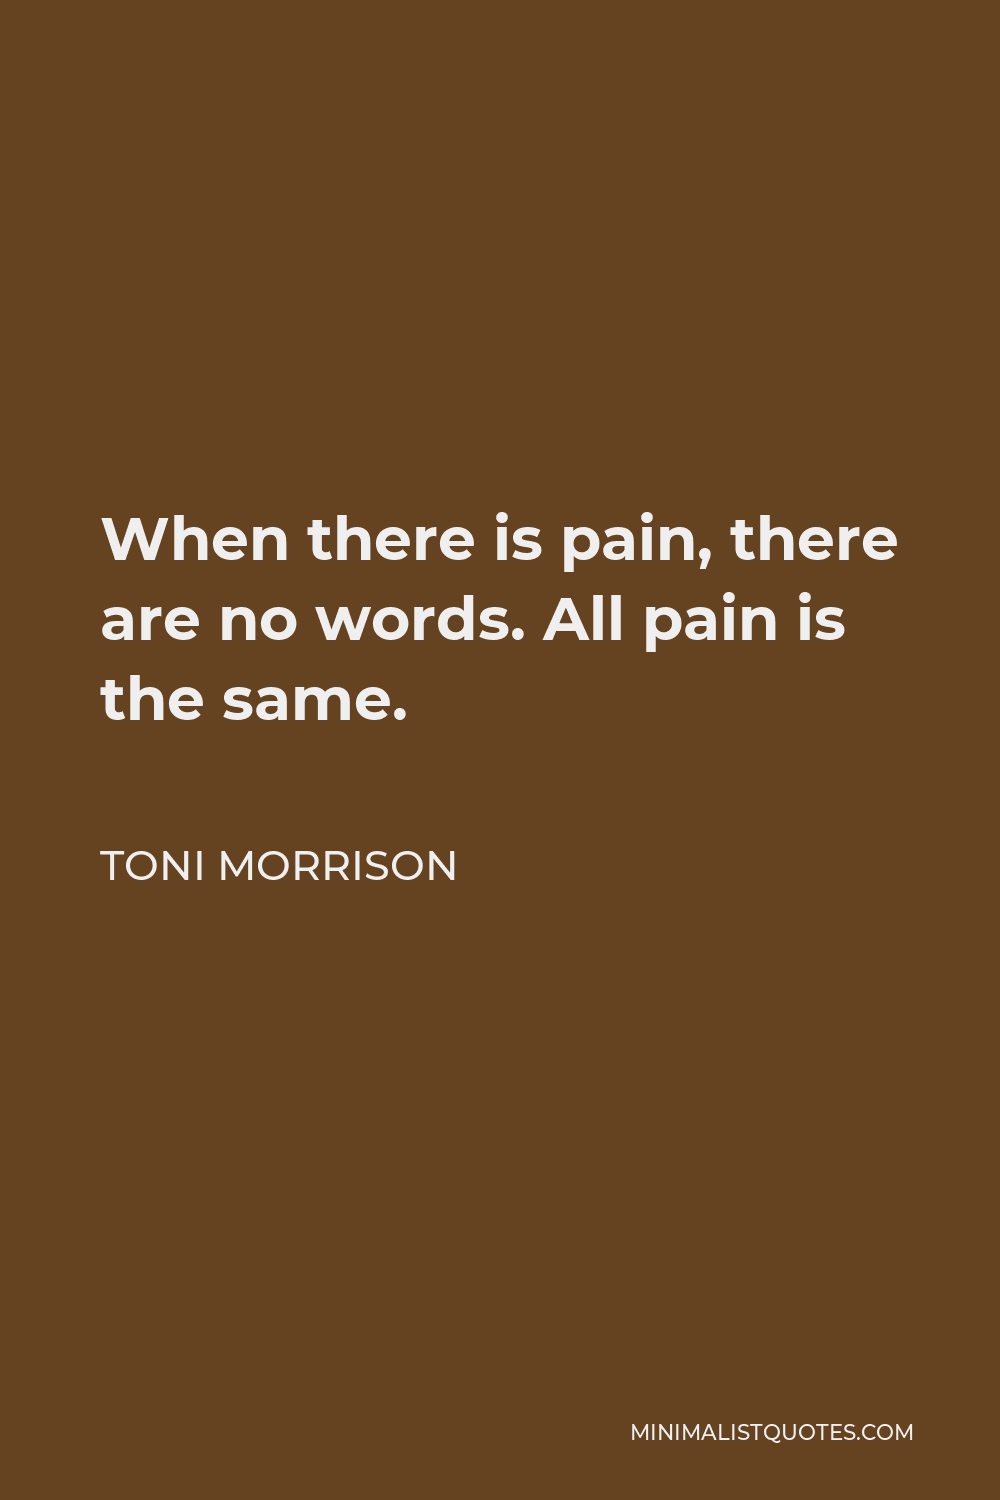 Toni Morrison Quote - When there is pain, there are no words. All pain is the same.